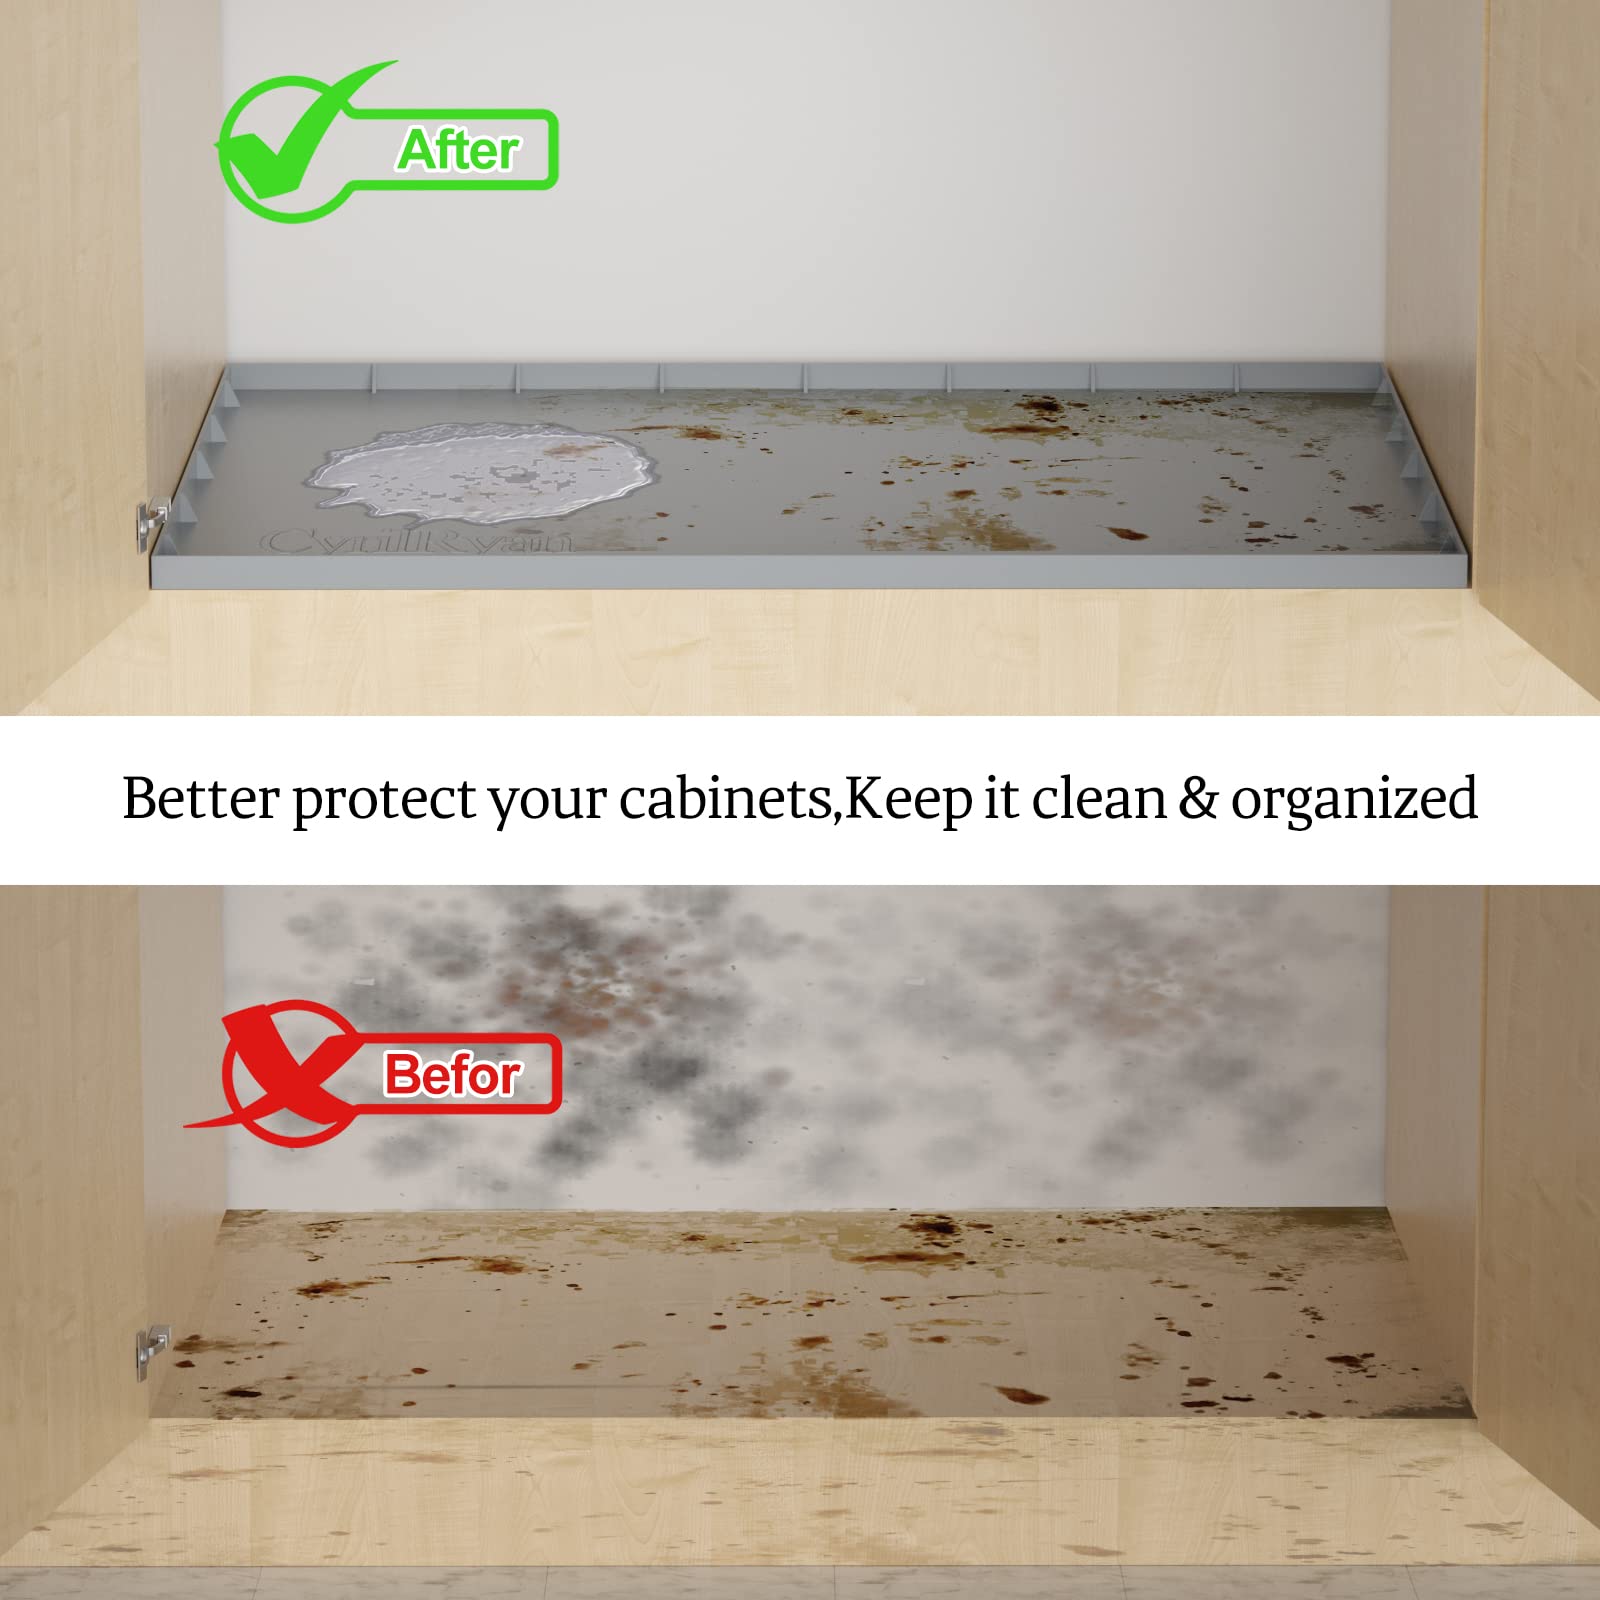 Under Sink Mat Waterproof for 36" Cabinet, Kitchen Rubber mat, Holds Over 3.3 Gallons Liquid Carbon Cabinets Leak Protector Bathroom Sink Line Drip Tray Sink Pan Gray 35x22.5 inch